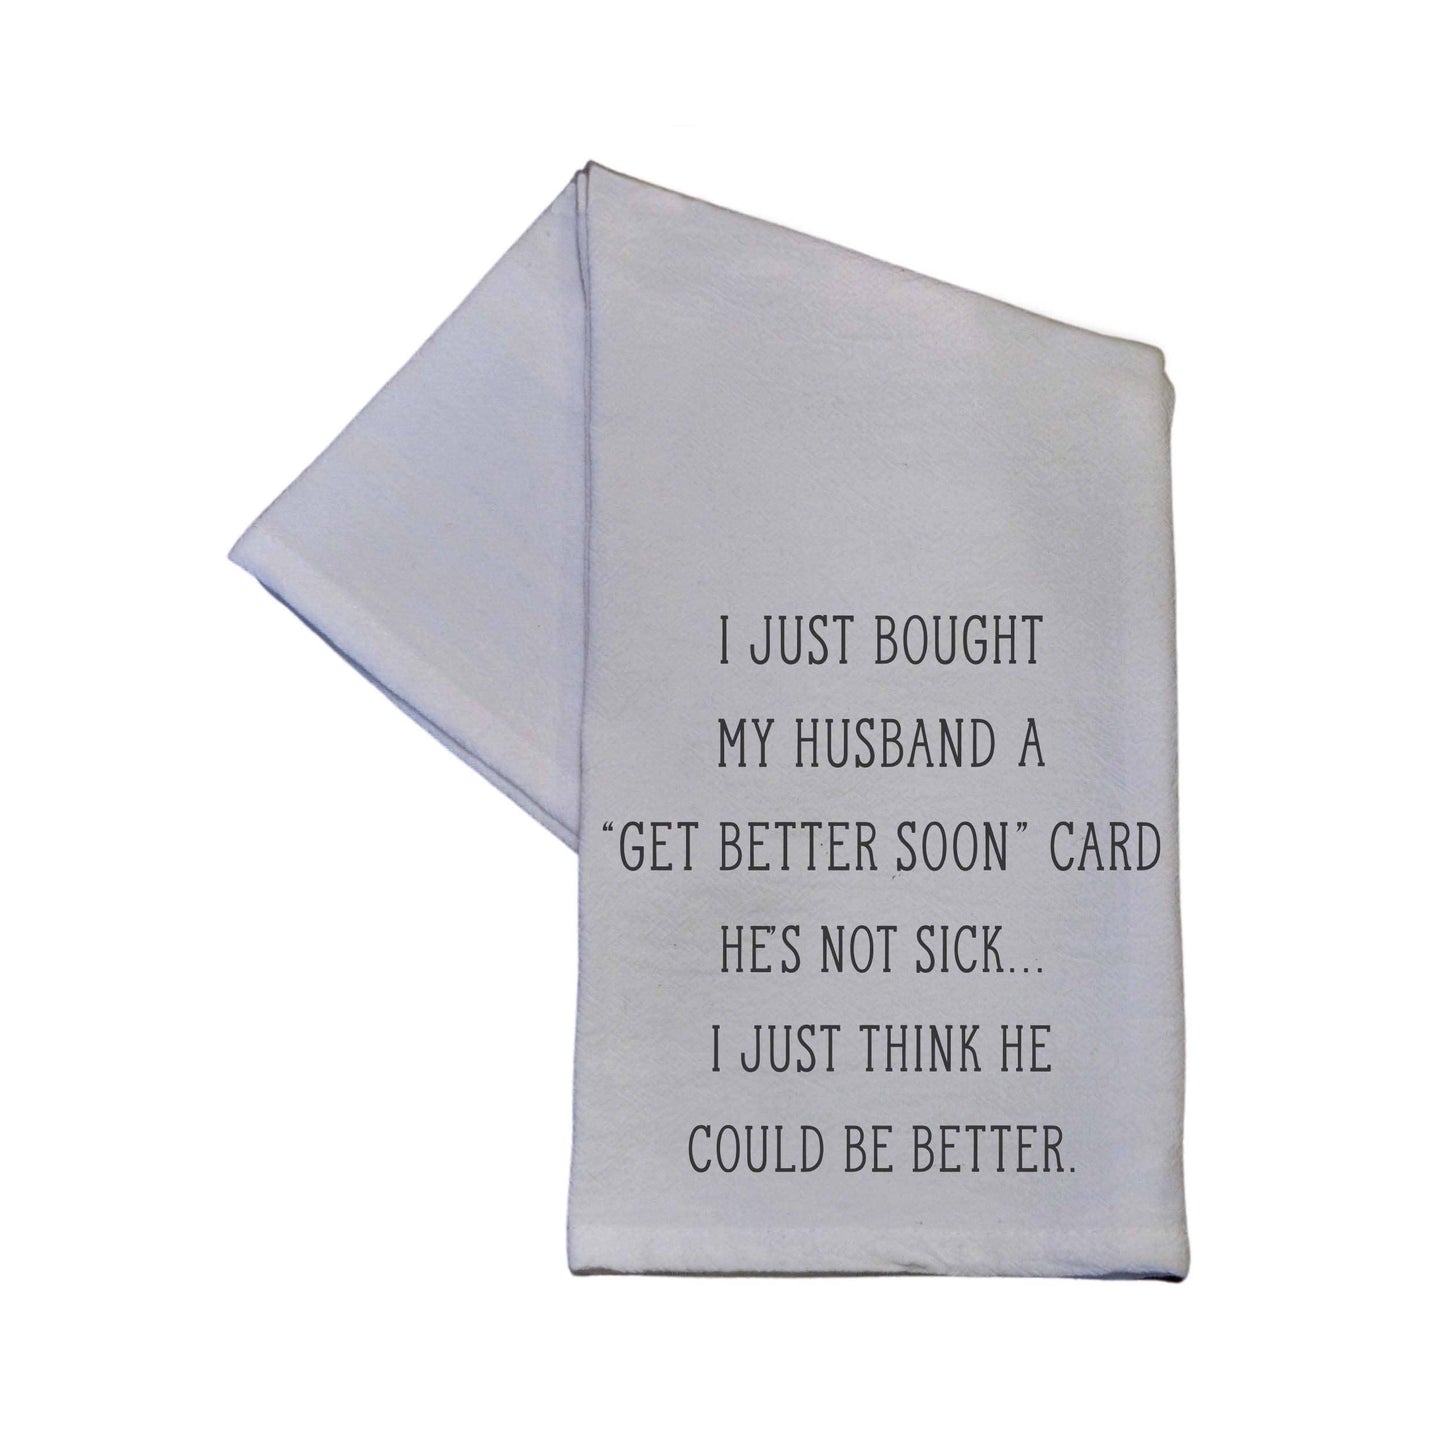 Driftless Studios - Get Better Soon Card Funny Tea Towel - Funny Gifts